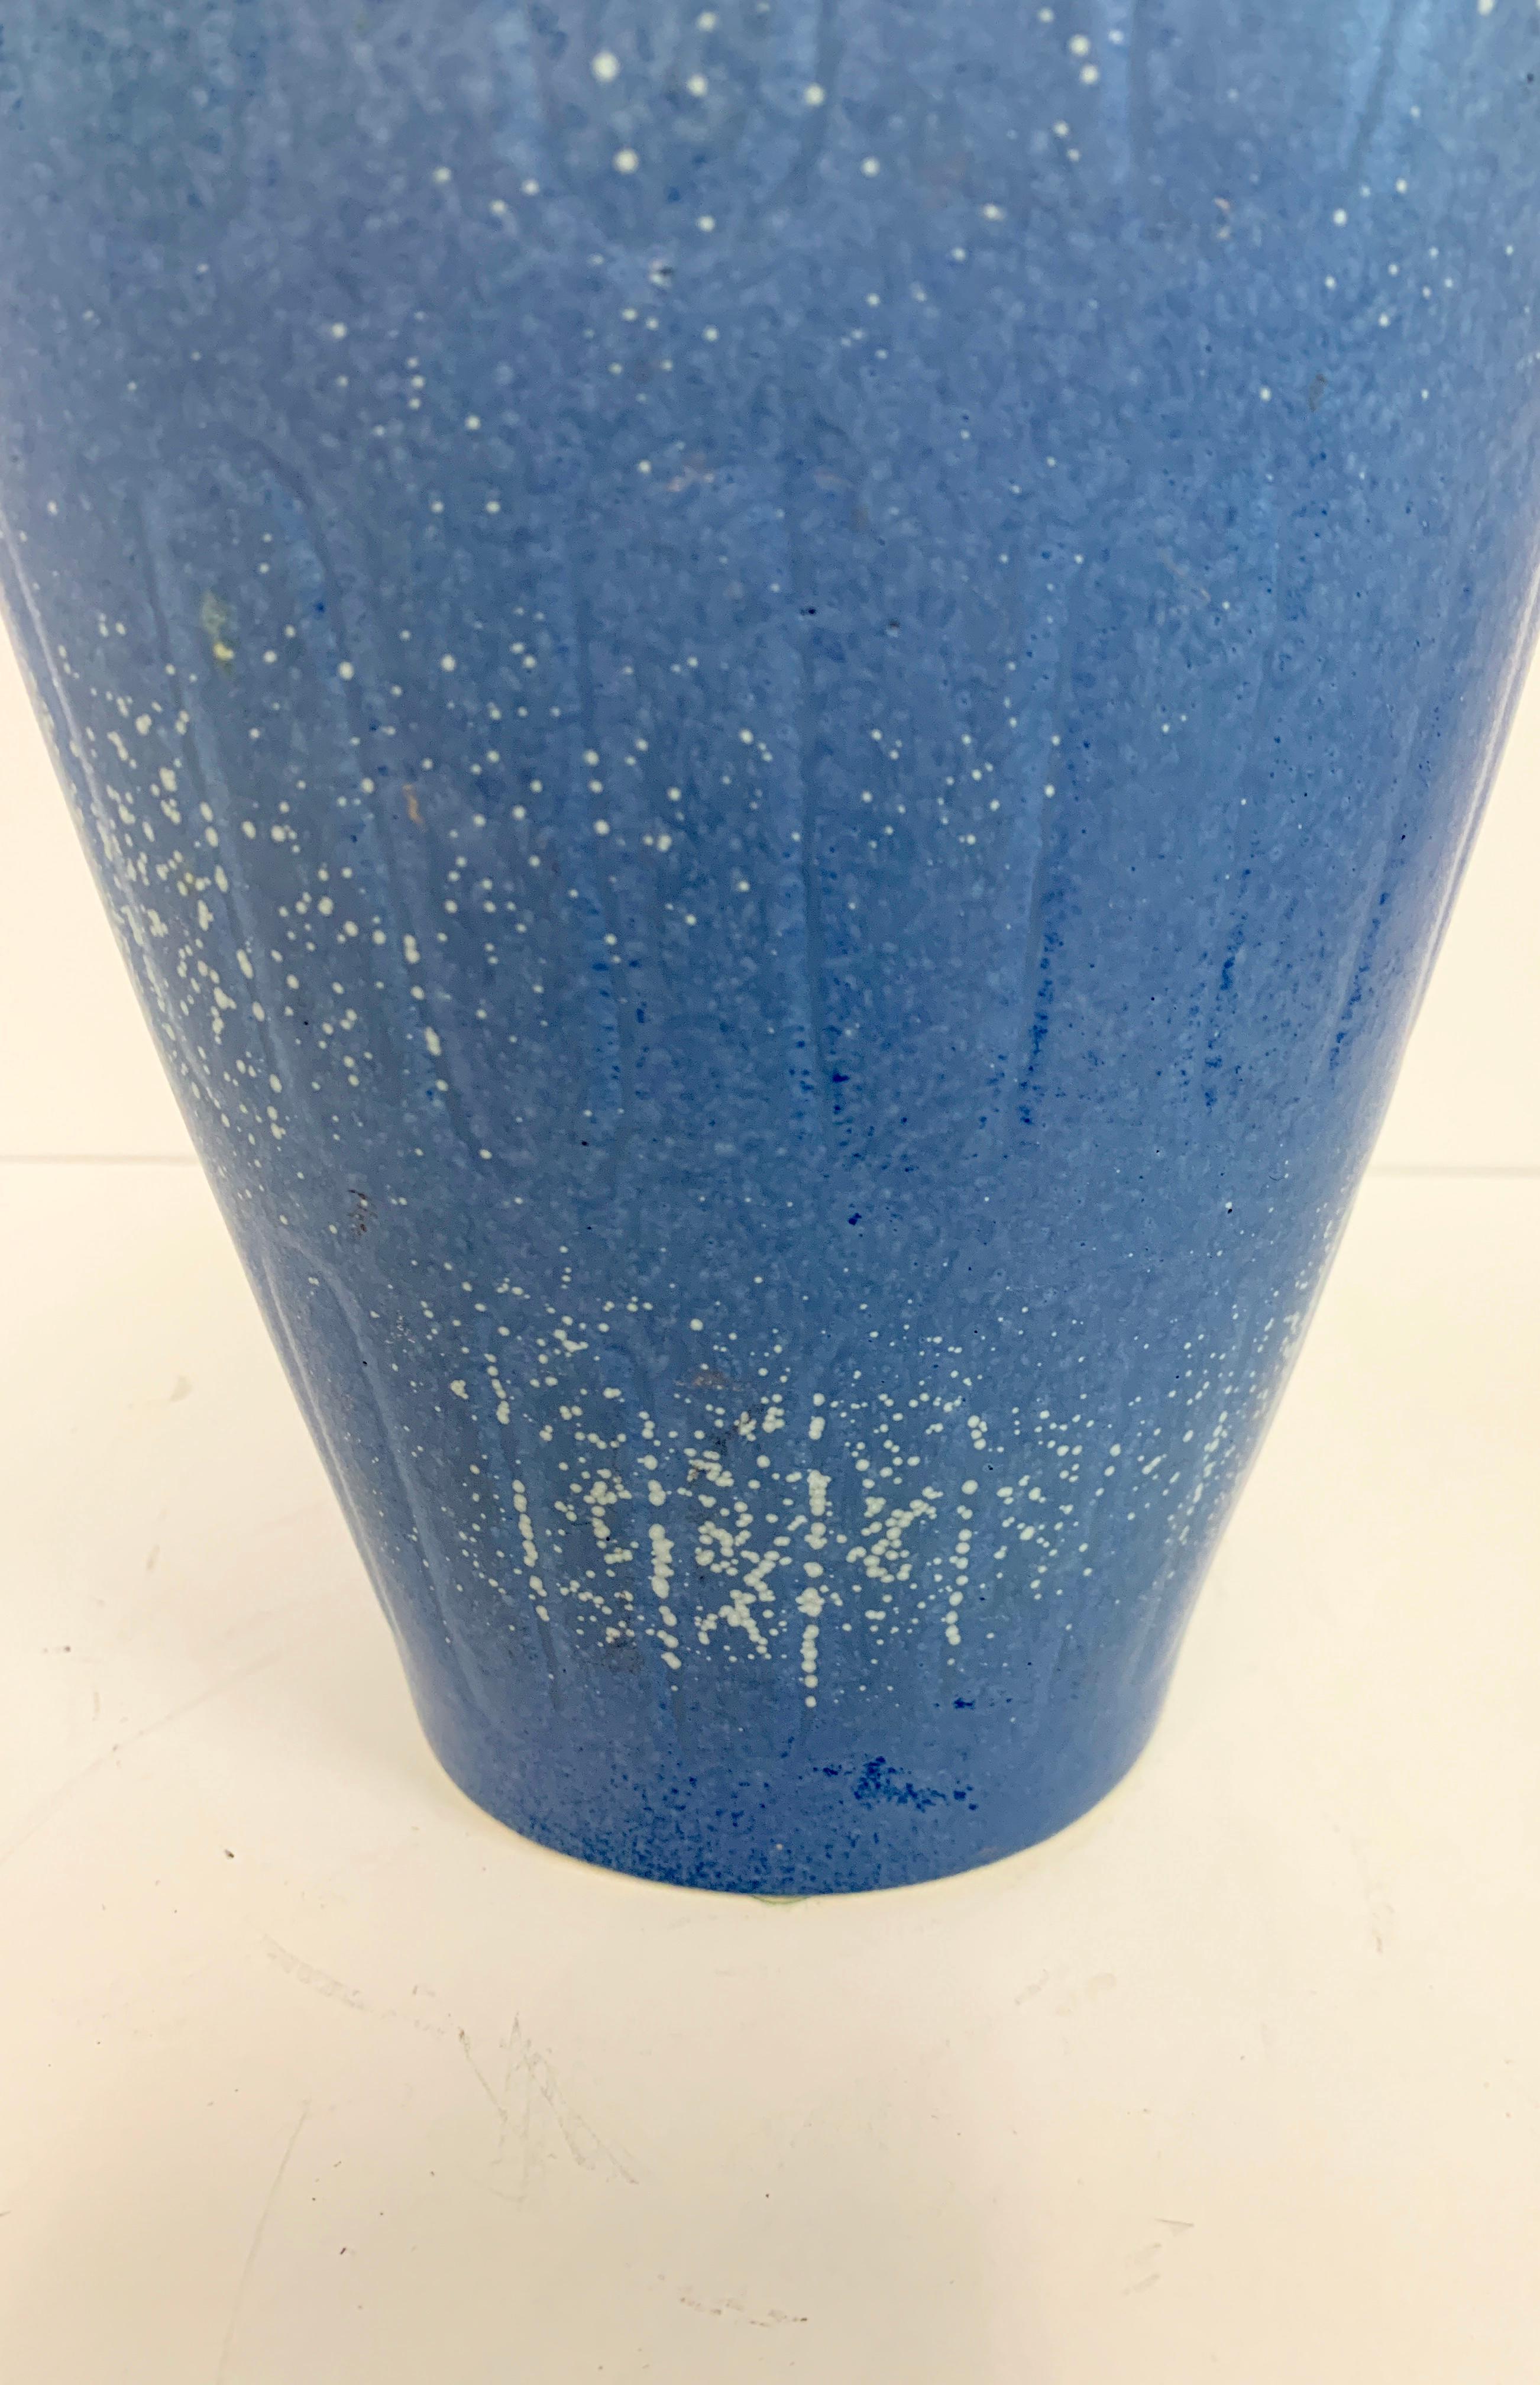 A nice blue glazed Gunnar Nylund vase for Rorstrand of Sweden. Marked on the base. In good age appropriate condition, with minor imperfections.